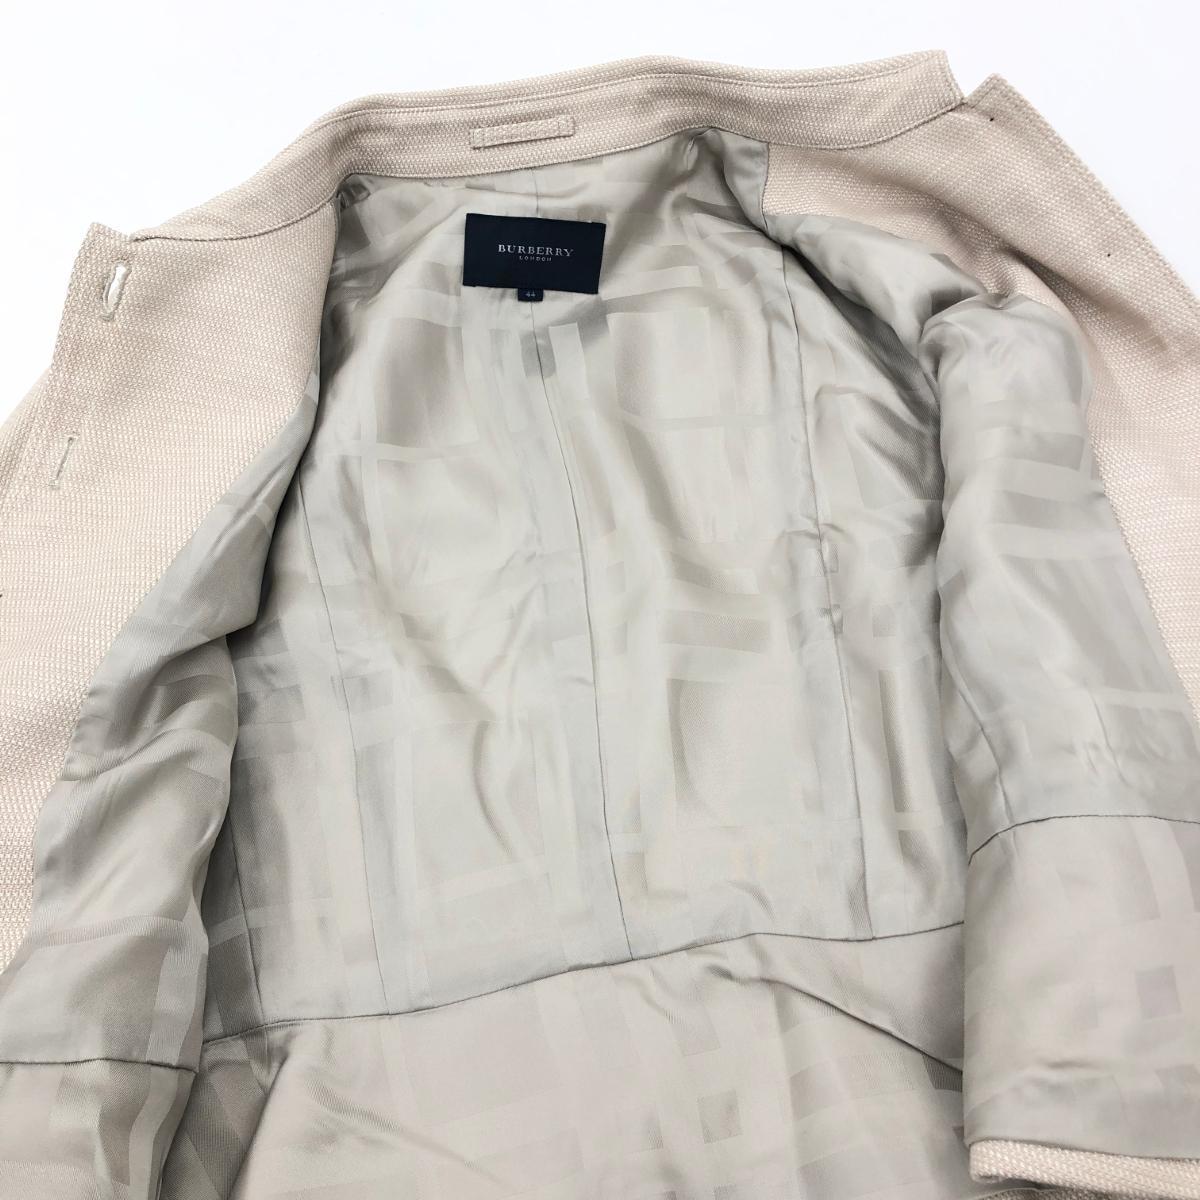  excellent *BURBERRY LONDON Burberry London jacket 44* beige lady's inside side check pattern largish size outer 